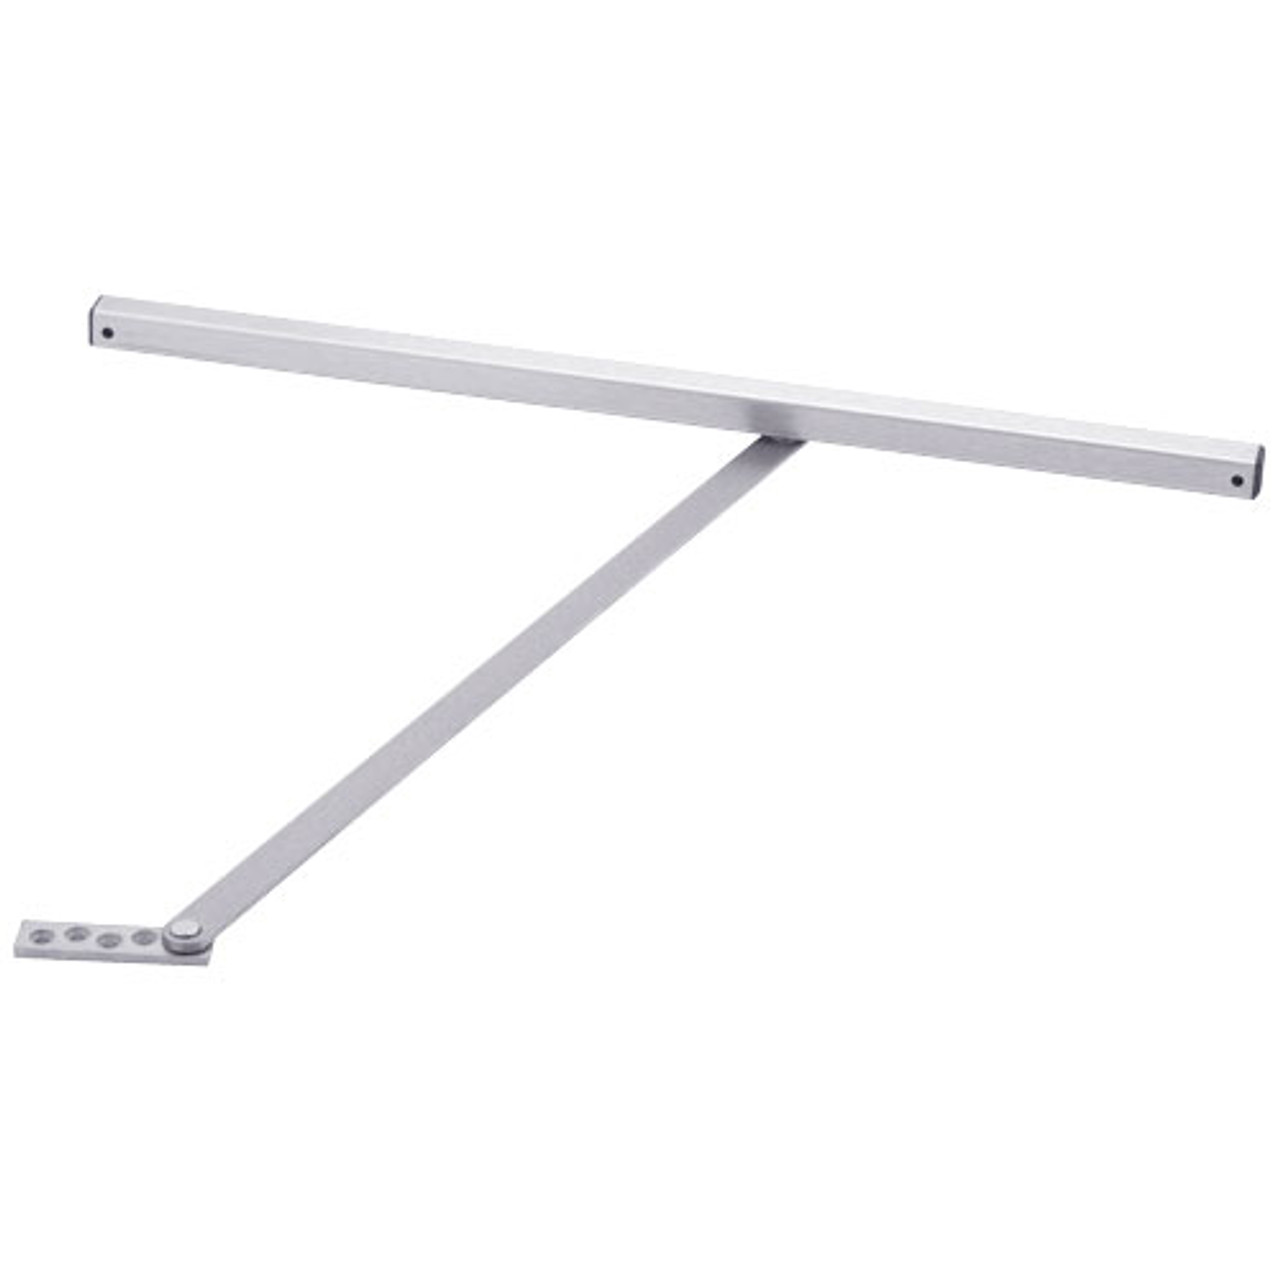 452S-US32-SHIM-3 Glynn Johnson 450 Series Medium Duty Surface Overhead in Polished stainless steel